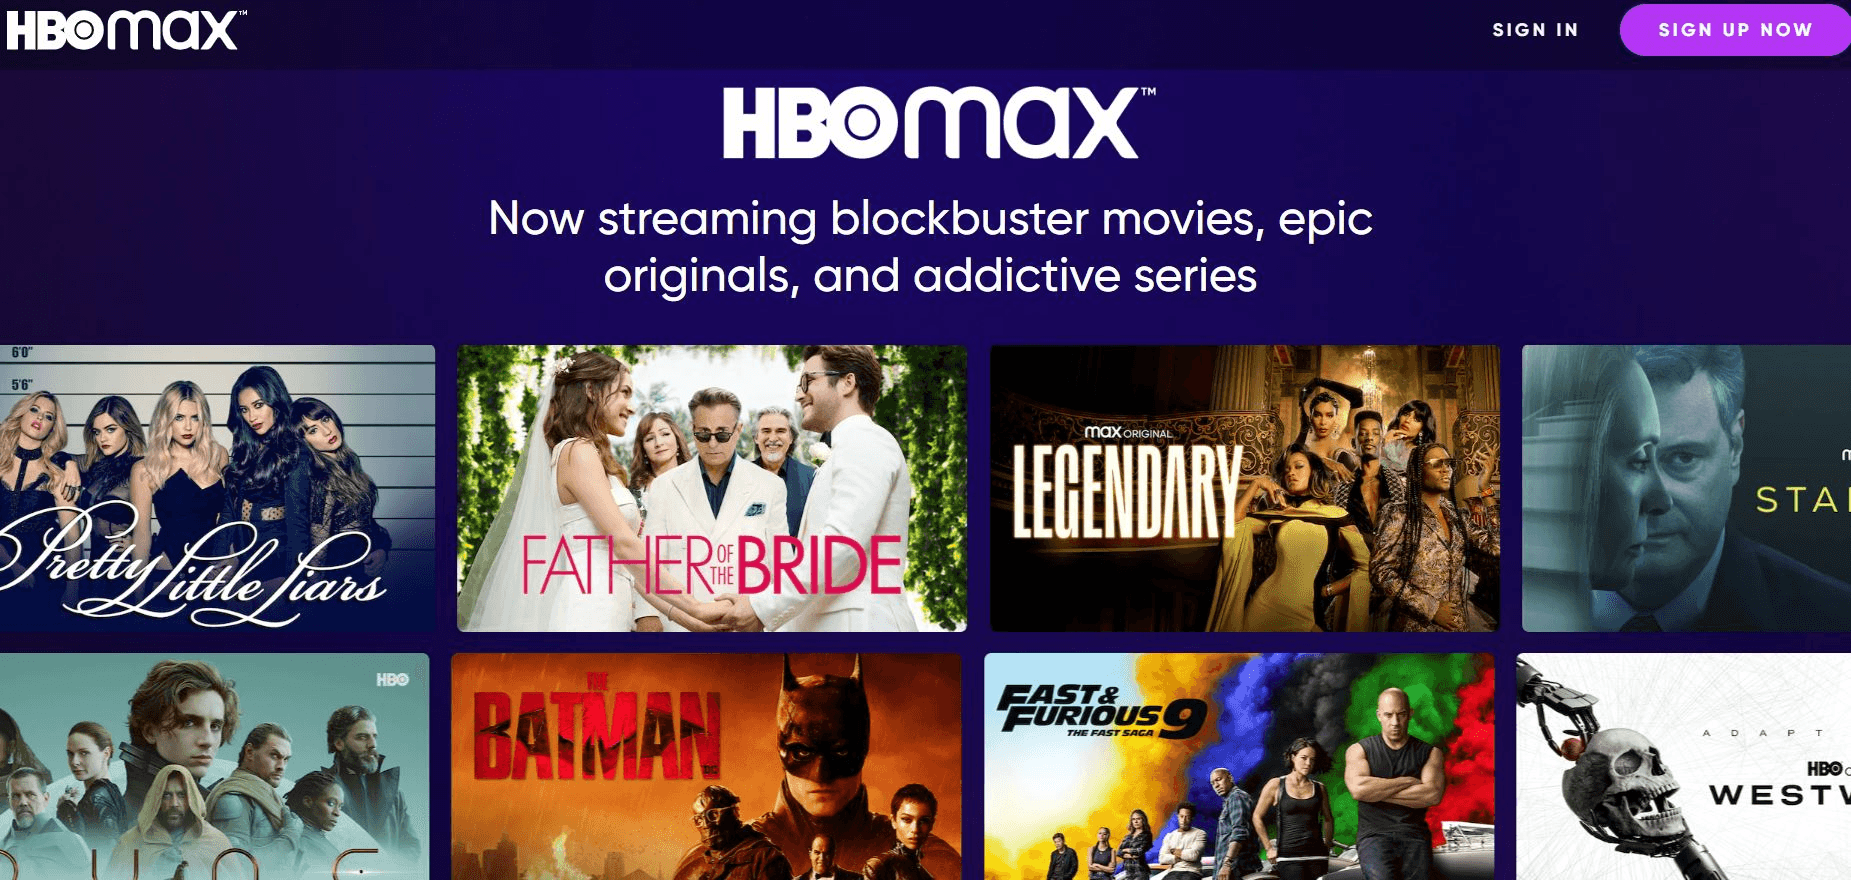 Stream HBO Max on all your favorite devices including the Apple TV.